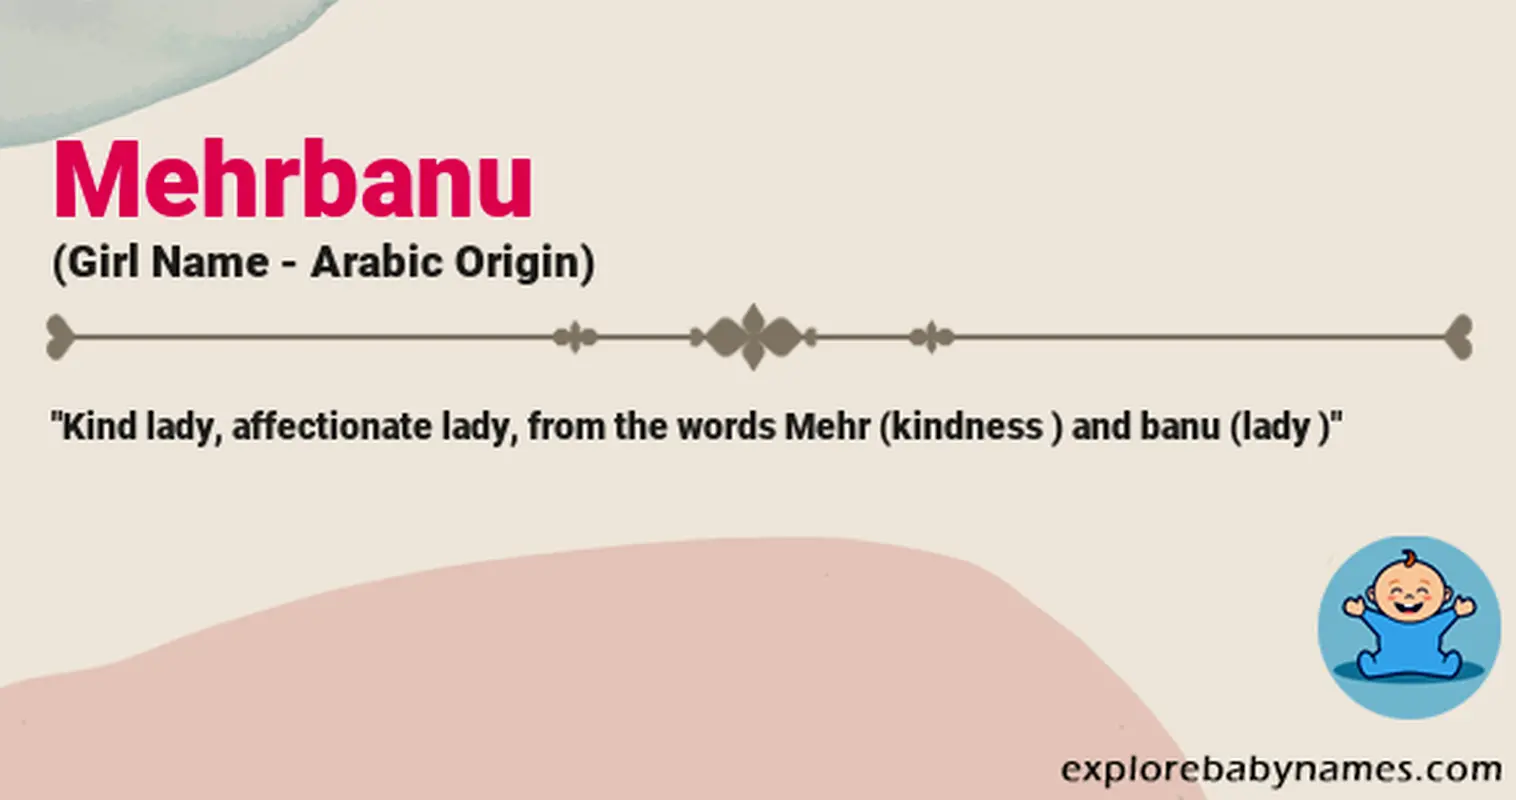 Meaning of Mehrbanu